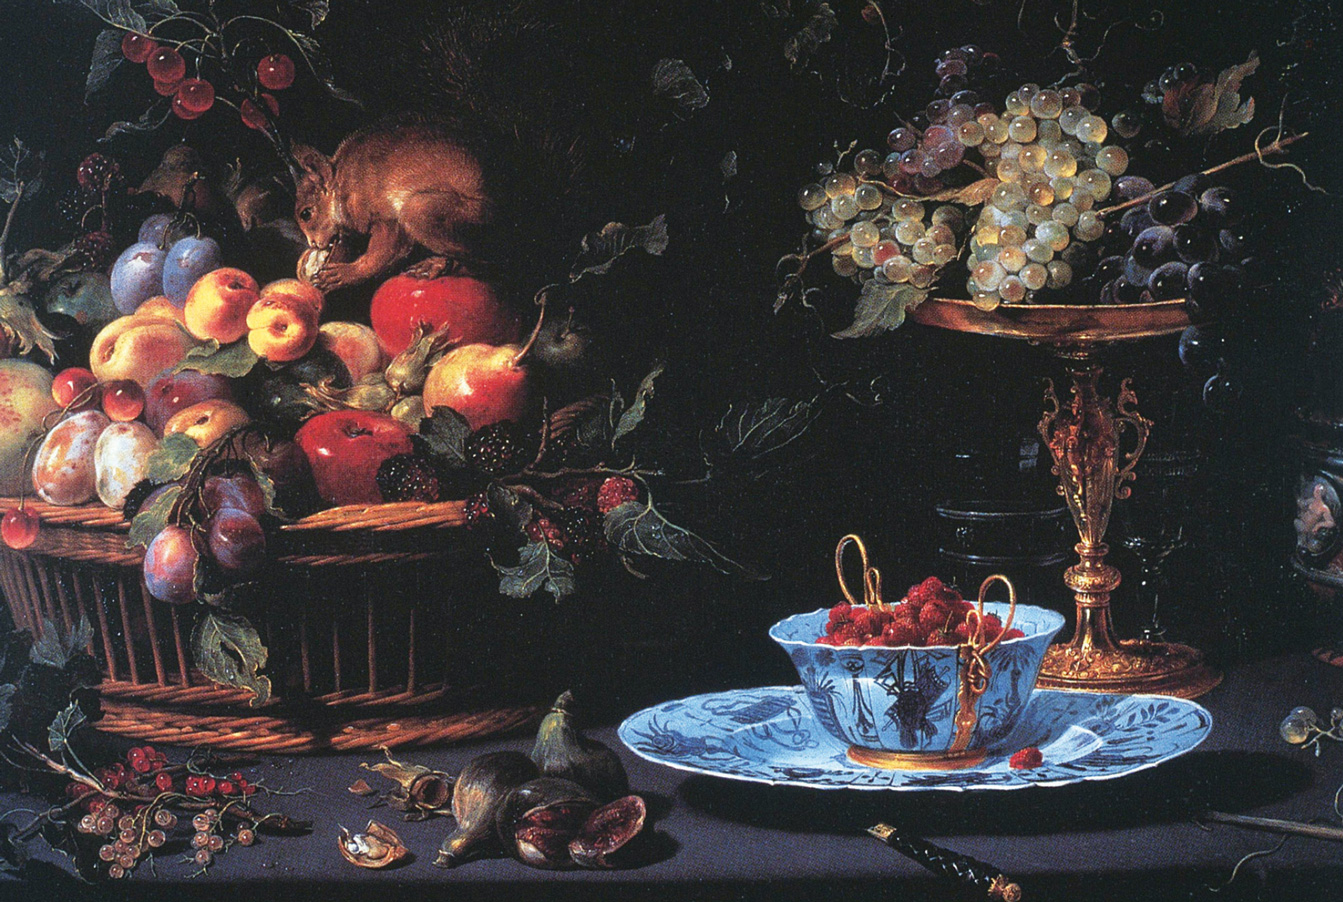 A sixteen sixteen painting by Frans Snyders, titled “Still Life with Fruit, Wan-Li Porcelain, and Squirrel,” depicting an arrangement of fruit, ornamental plateware, and a squirrel upon a table.